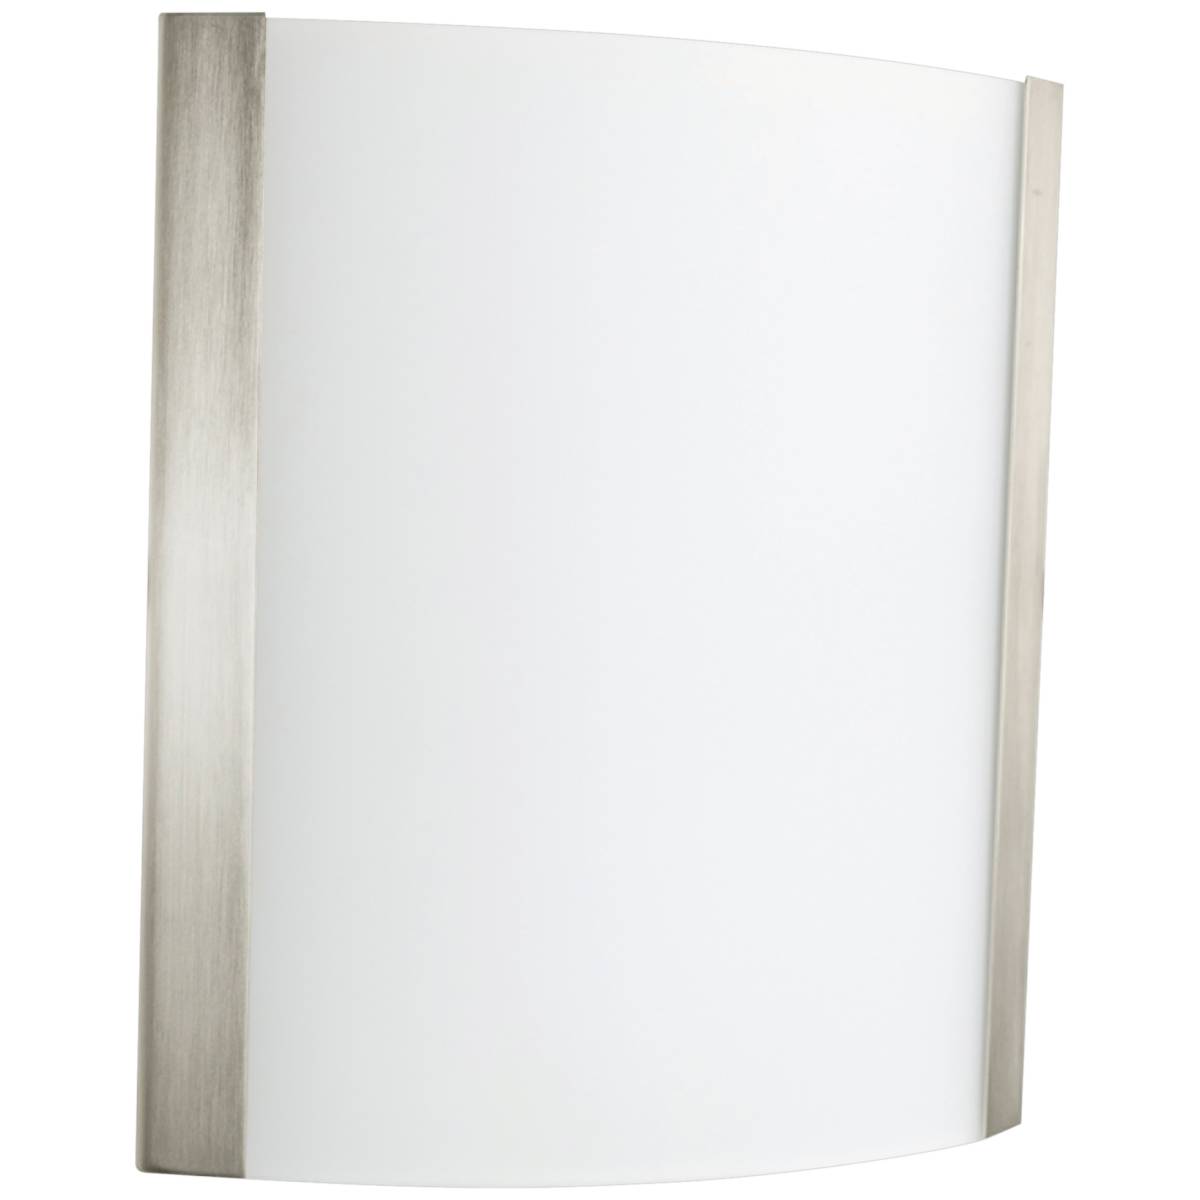 Ideal 10 And One Quarter High Satin Nickel Led Wall Sconce  293m1 ?qlt=70&wid=1200&hei=1200&fmt=jpeg